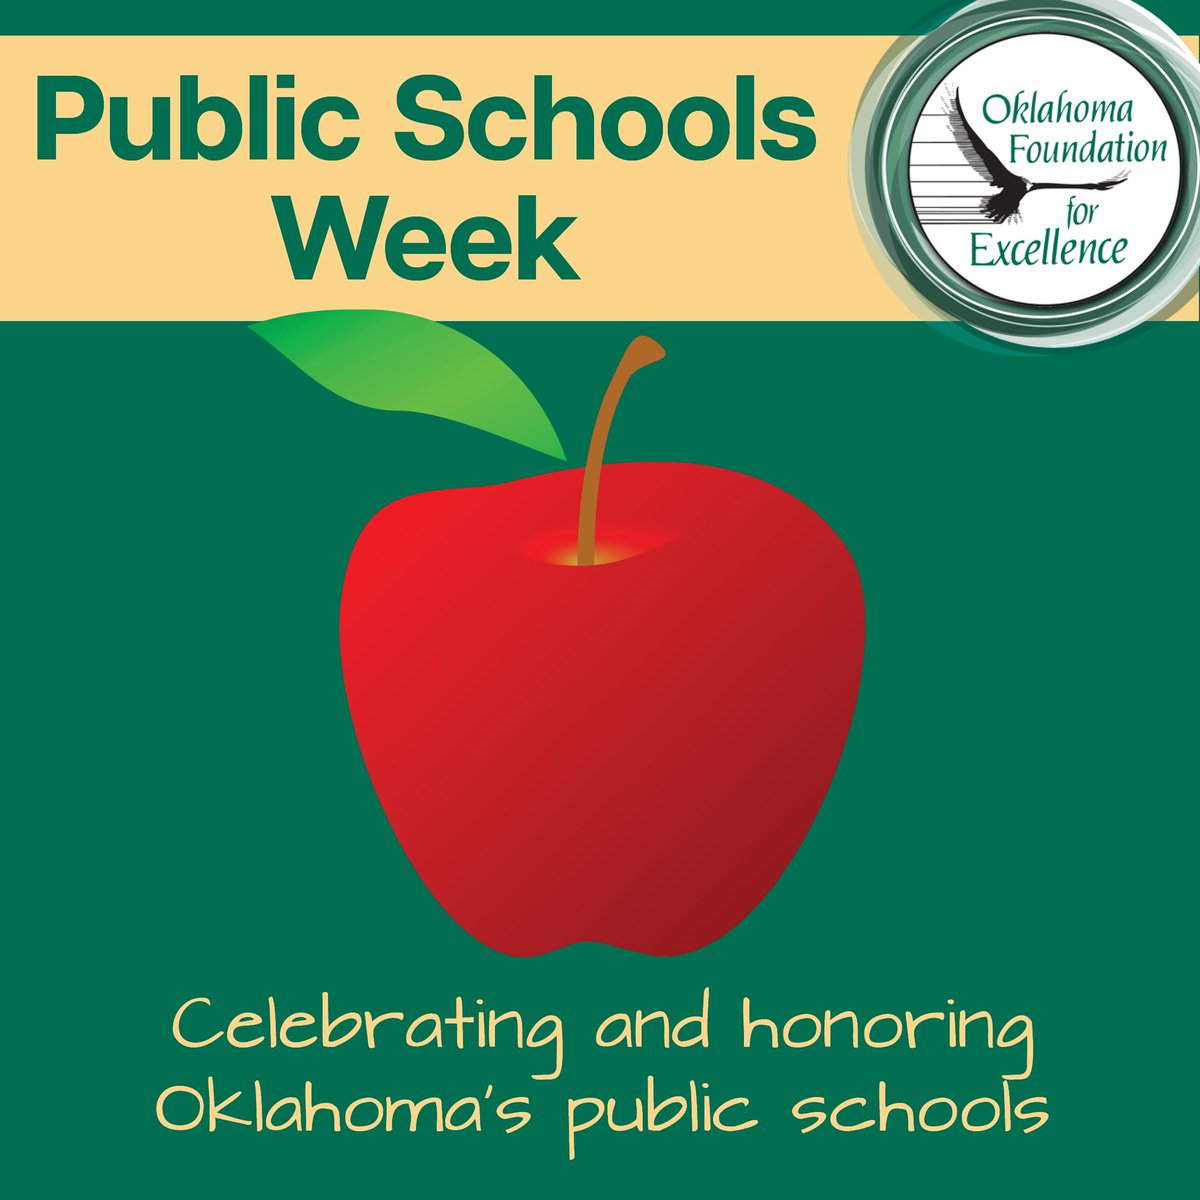 It’s Public Schools Week, a time to celebrate the importance of public schools around the country. We are so thankful for our Oklahoma public schools! #oklaed